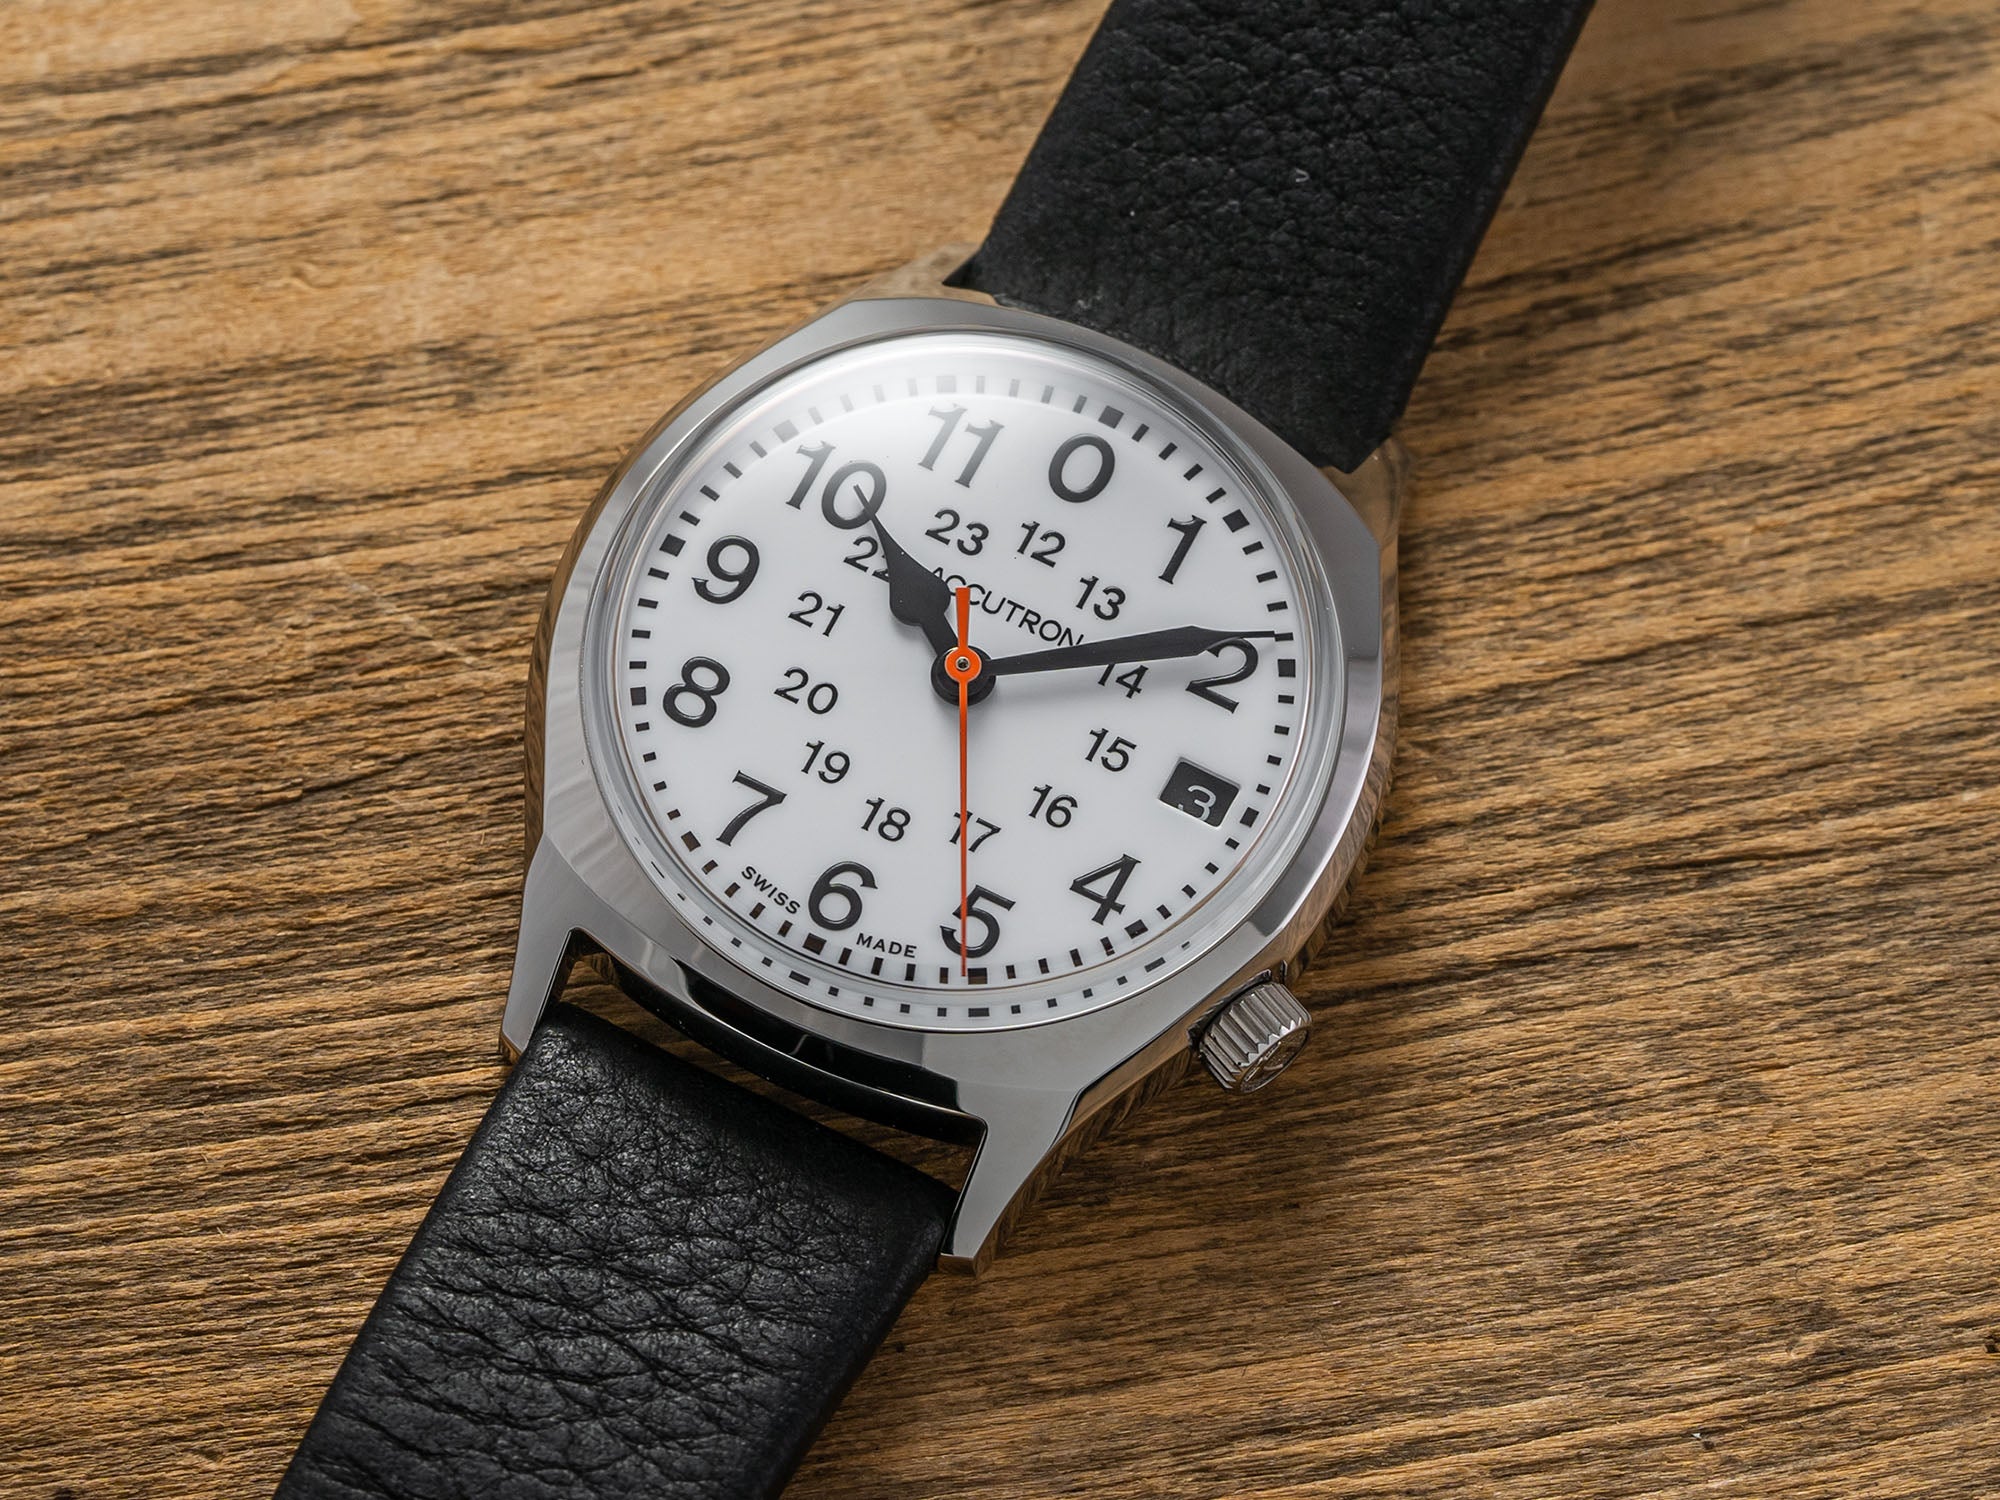 31 Great Watches For Small Wrists (Updated for 2023) - The Modest Man